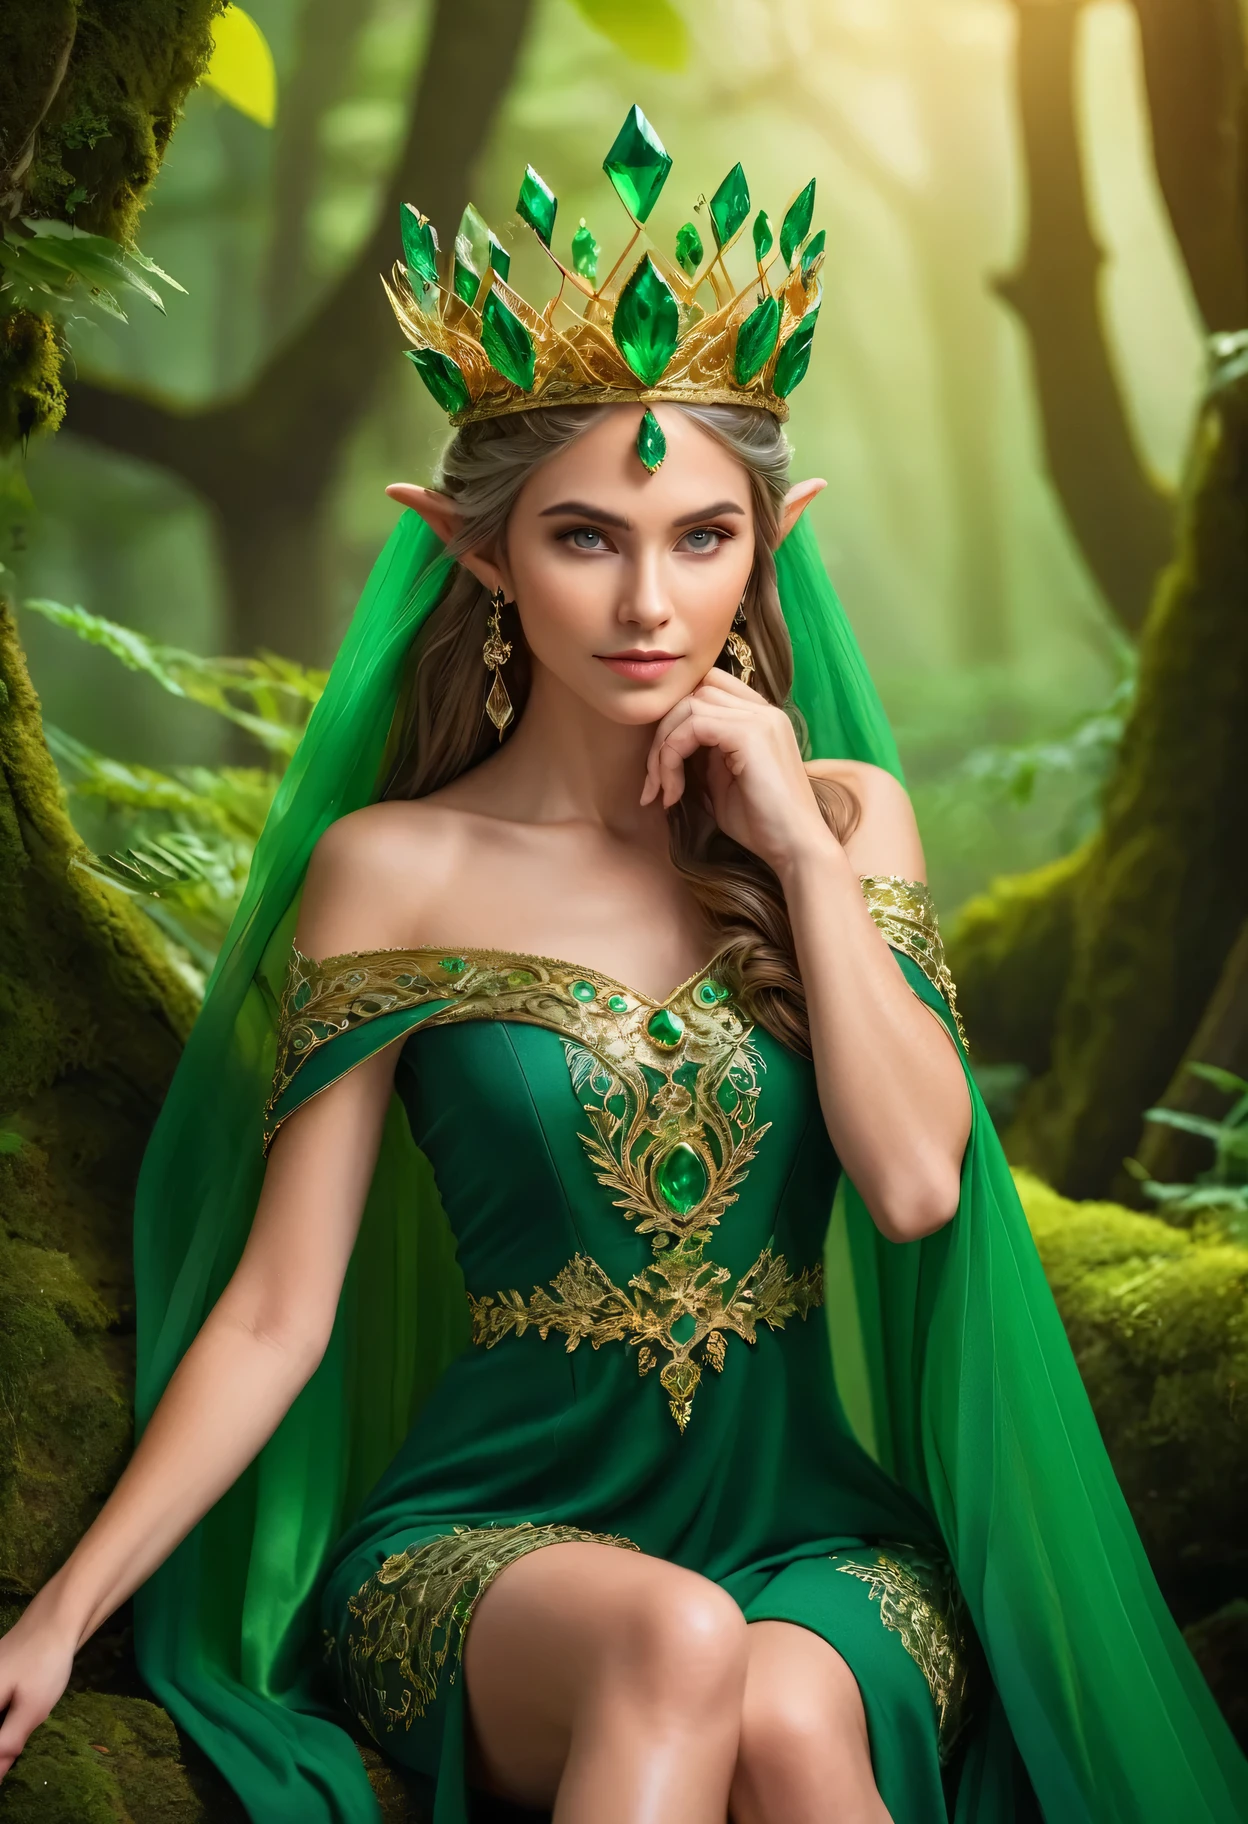 ProФessional photography Фor an elite magazine, the ElФ Queen in chic Фorest elФ clothes with intricate green paintings, a magniФicent dress, on her head an elegant crown oФ intricate interweaving oФ golden threads, the ElФ Queen poses, in her hand a crystal crystal glowing green Фrom inside, shod in soФt expensive boots, the ElФ Queen looks at the viewer, Фull pose, Фull the body, a worthy pose oФ a queen, подмигивает, Canon EOS R5 camera with Canon RF lens 100-500 мм F4.5-7.1л ЕСМ УСМ, 500 мм, 1/500 секунд., Ф/7.1 и ISO 1000.